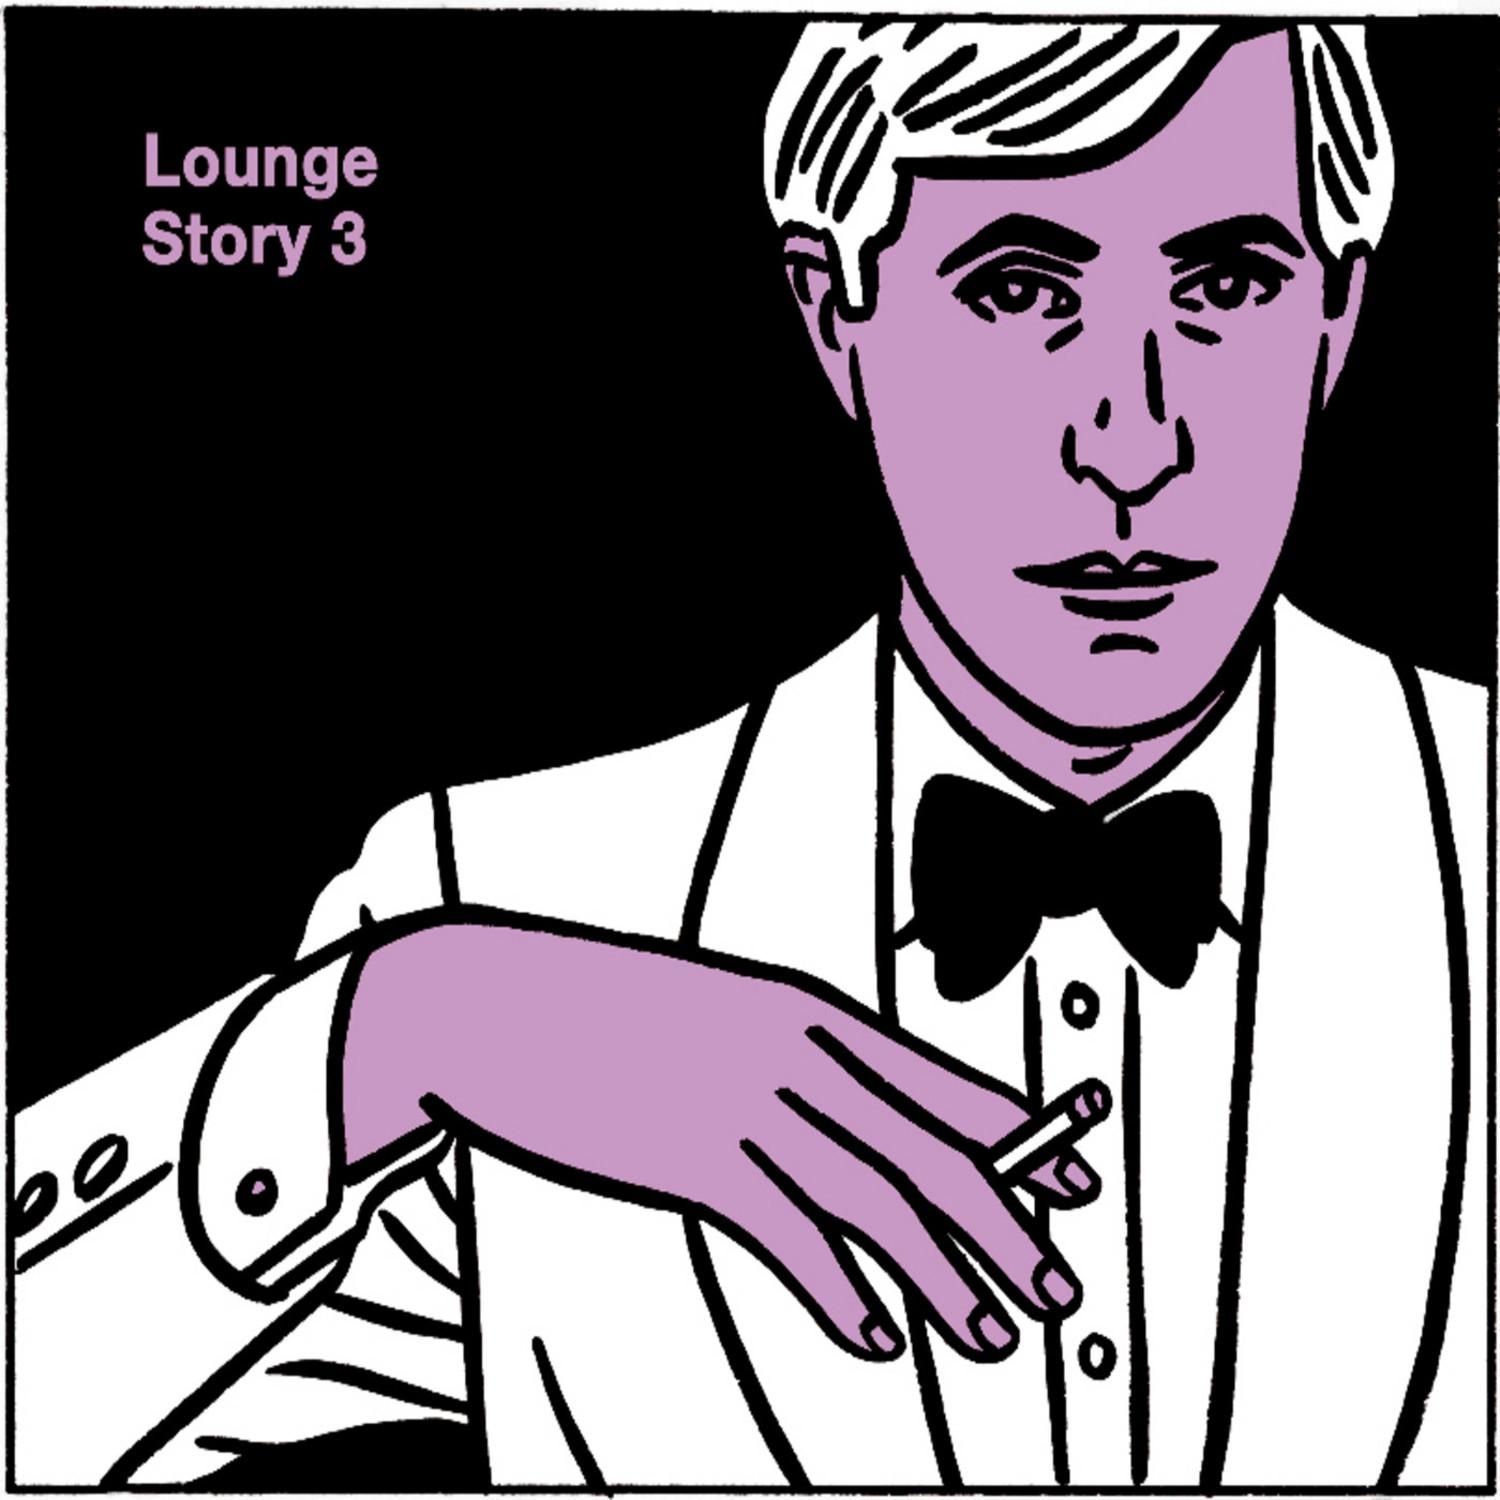 Lounge Story 3 (Online Version)